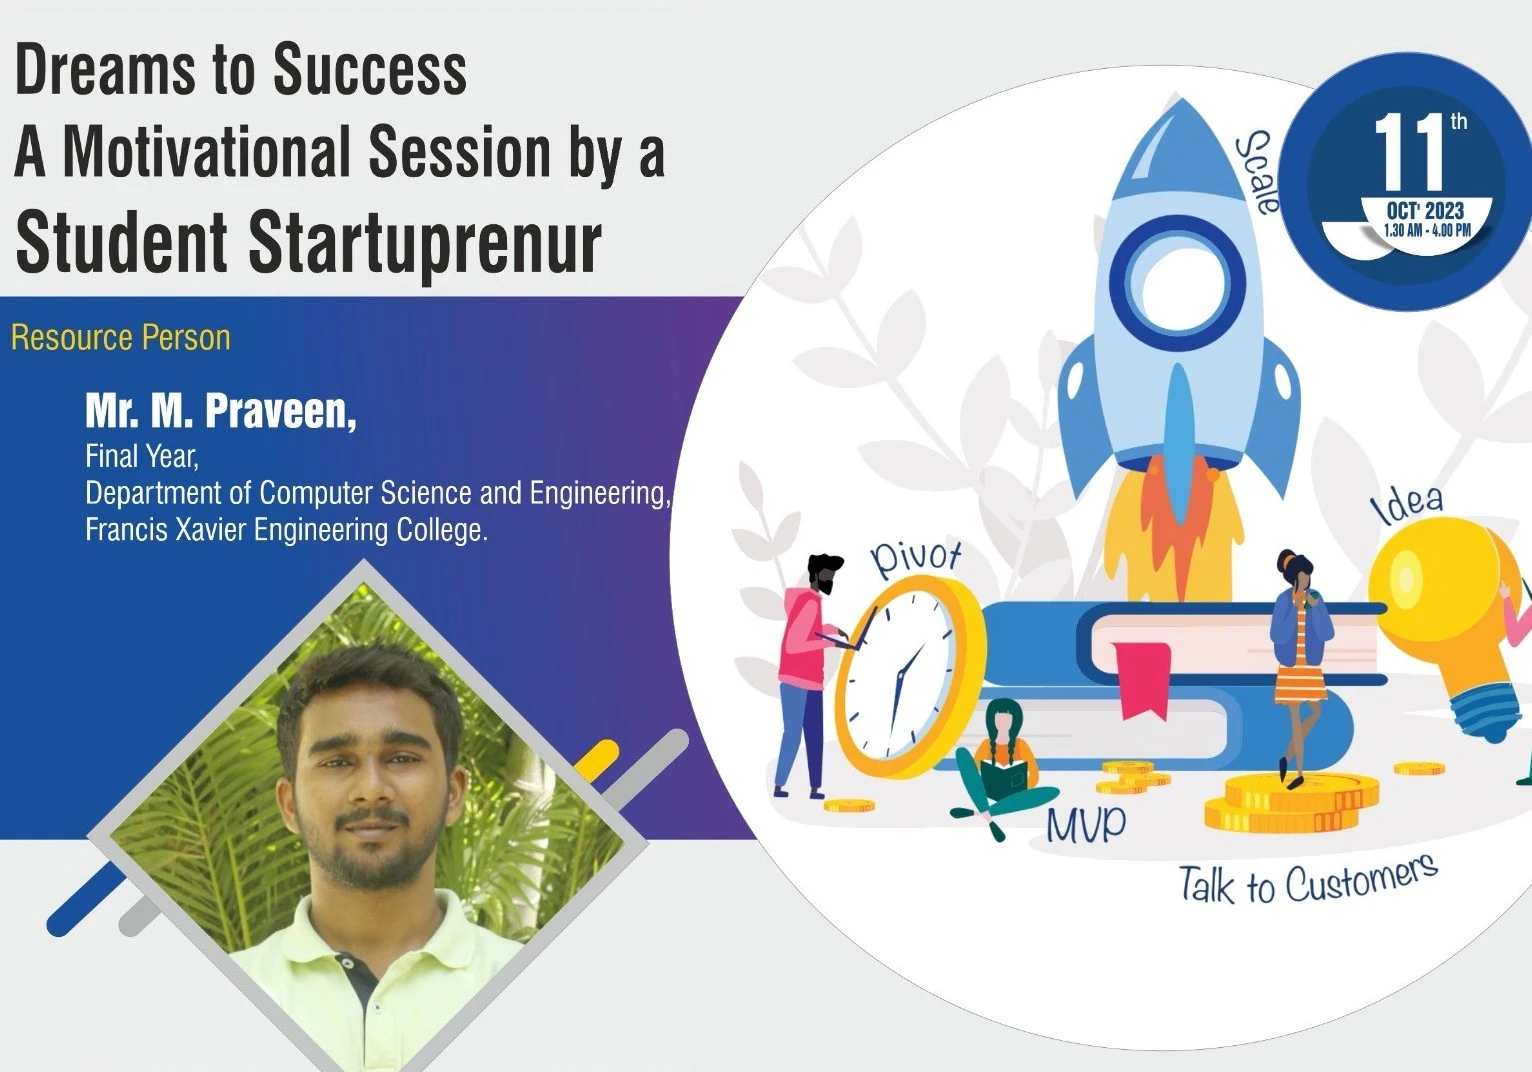 Dreams to success a Motivational session by a Student Startupreneur